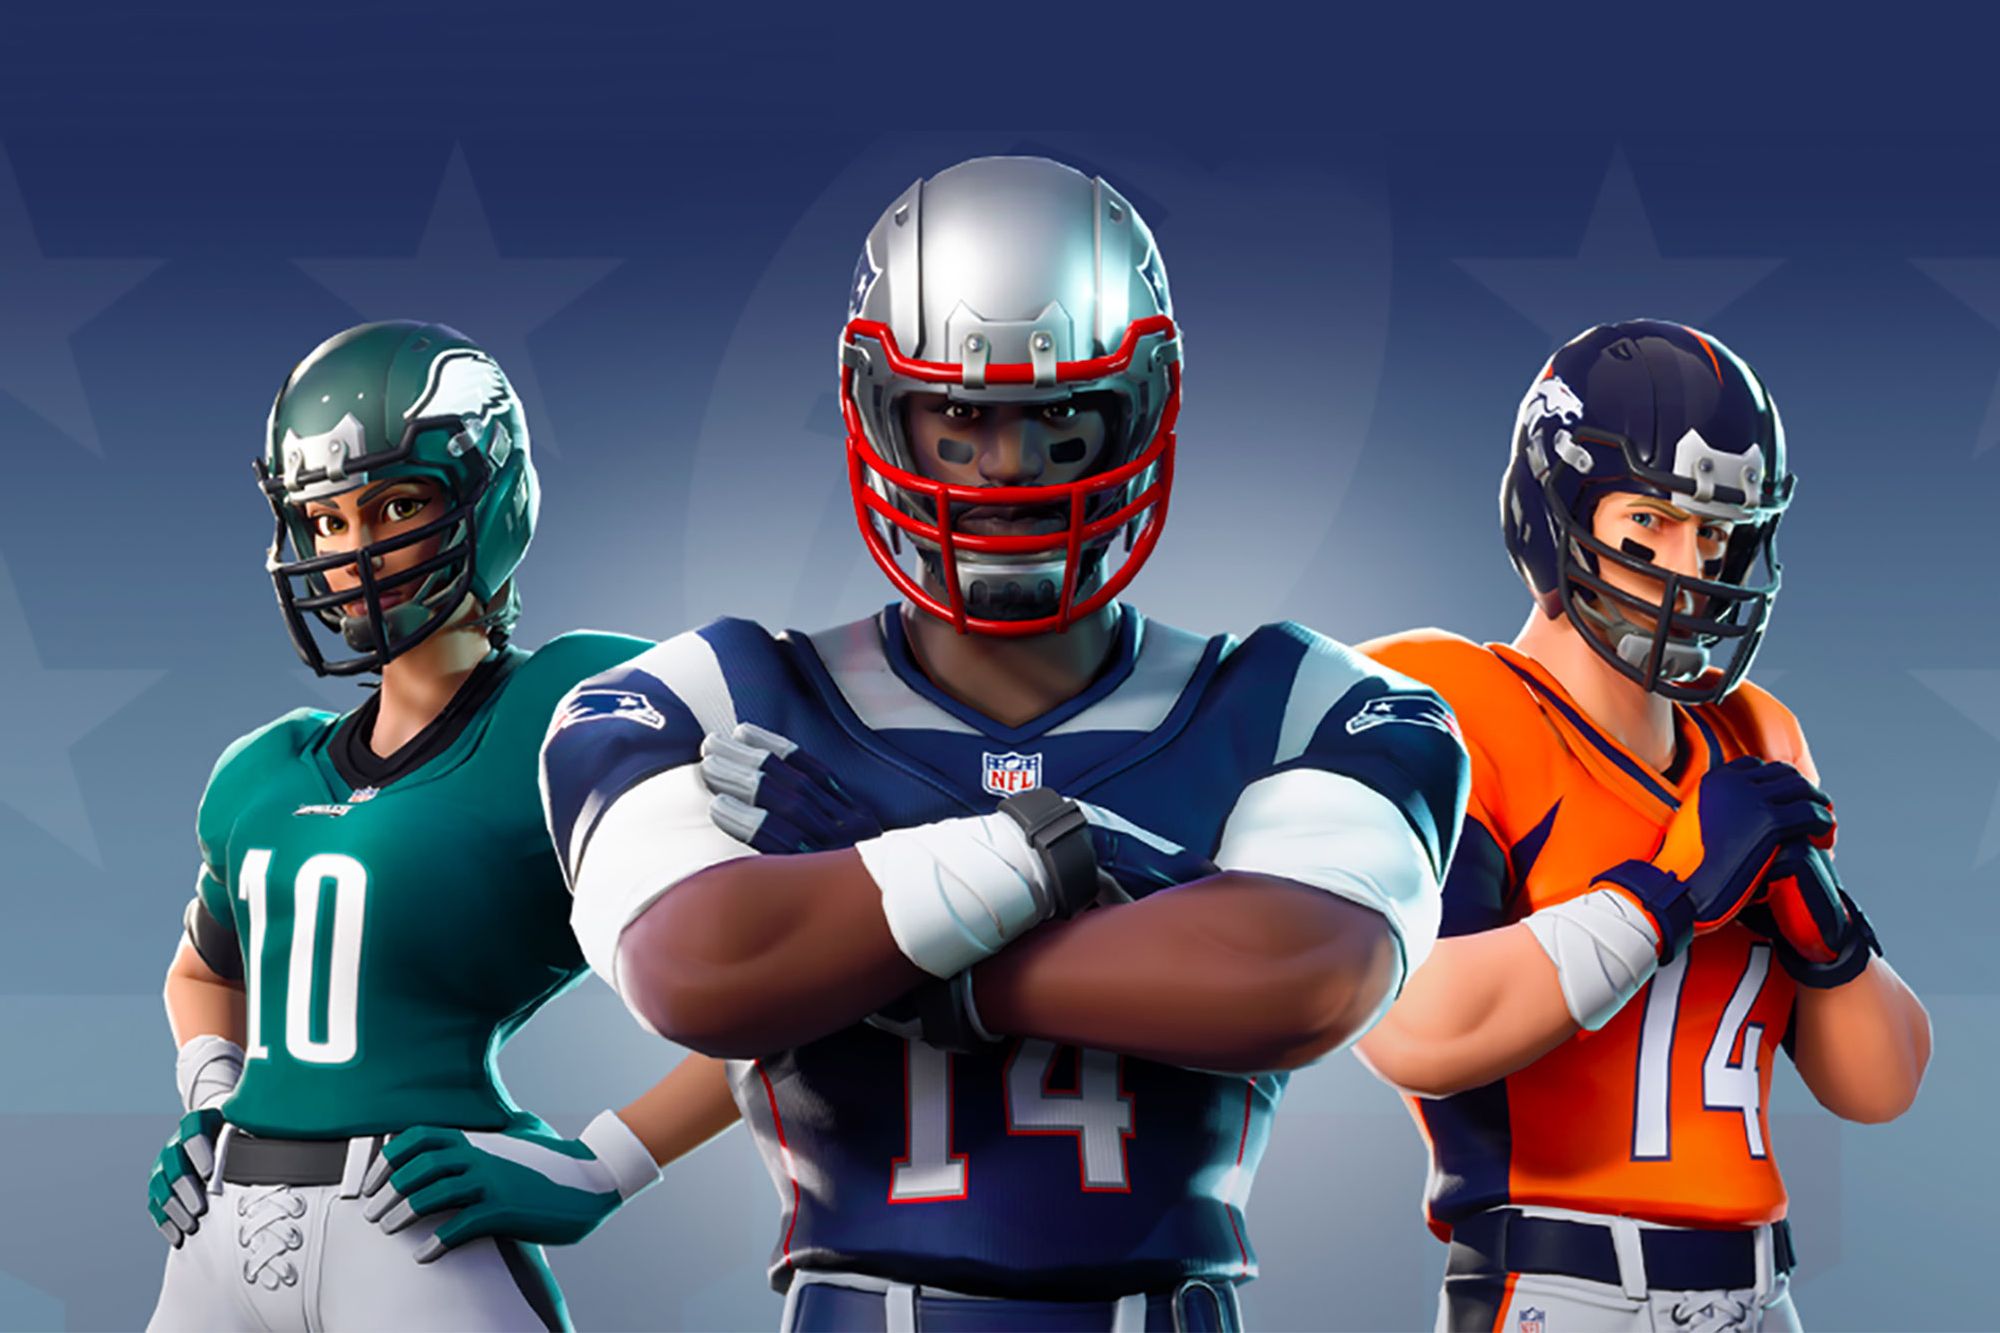 NFL Teams Up With Epic Games to Bring All 32 Team Uniforms to 'Fortnite